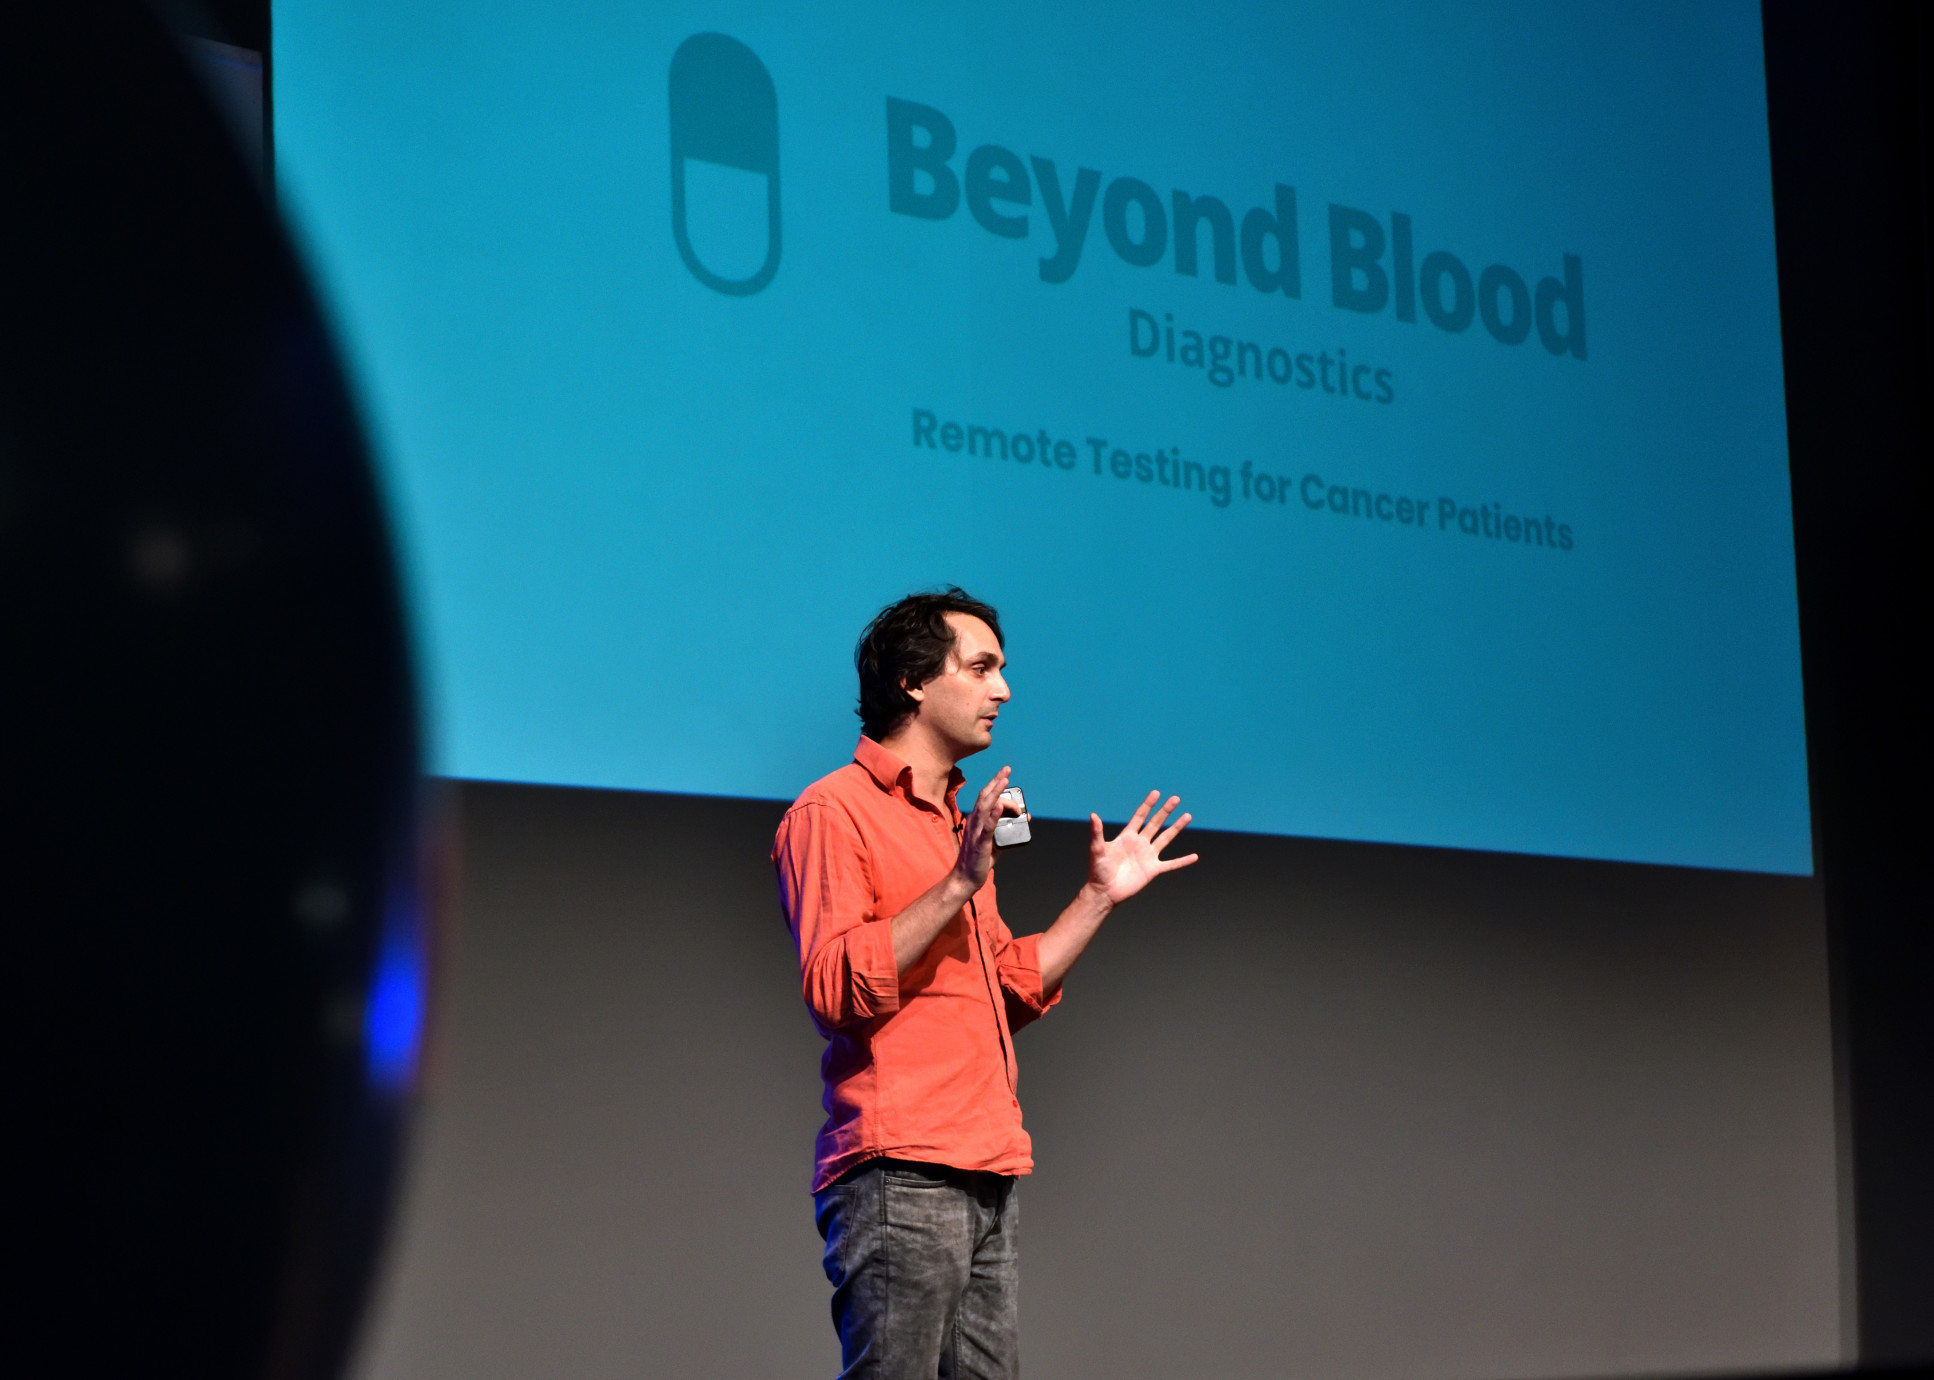 Manfredi San Germano, founder of Beyond Blood, presents in front of a screen